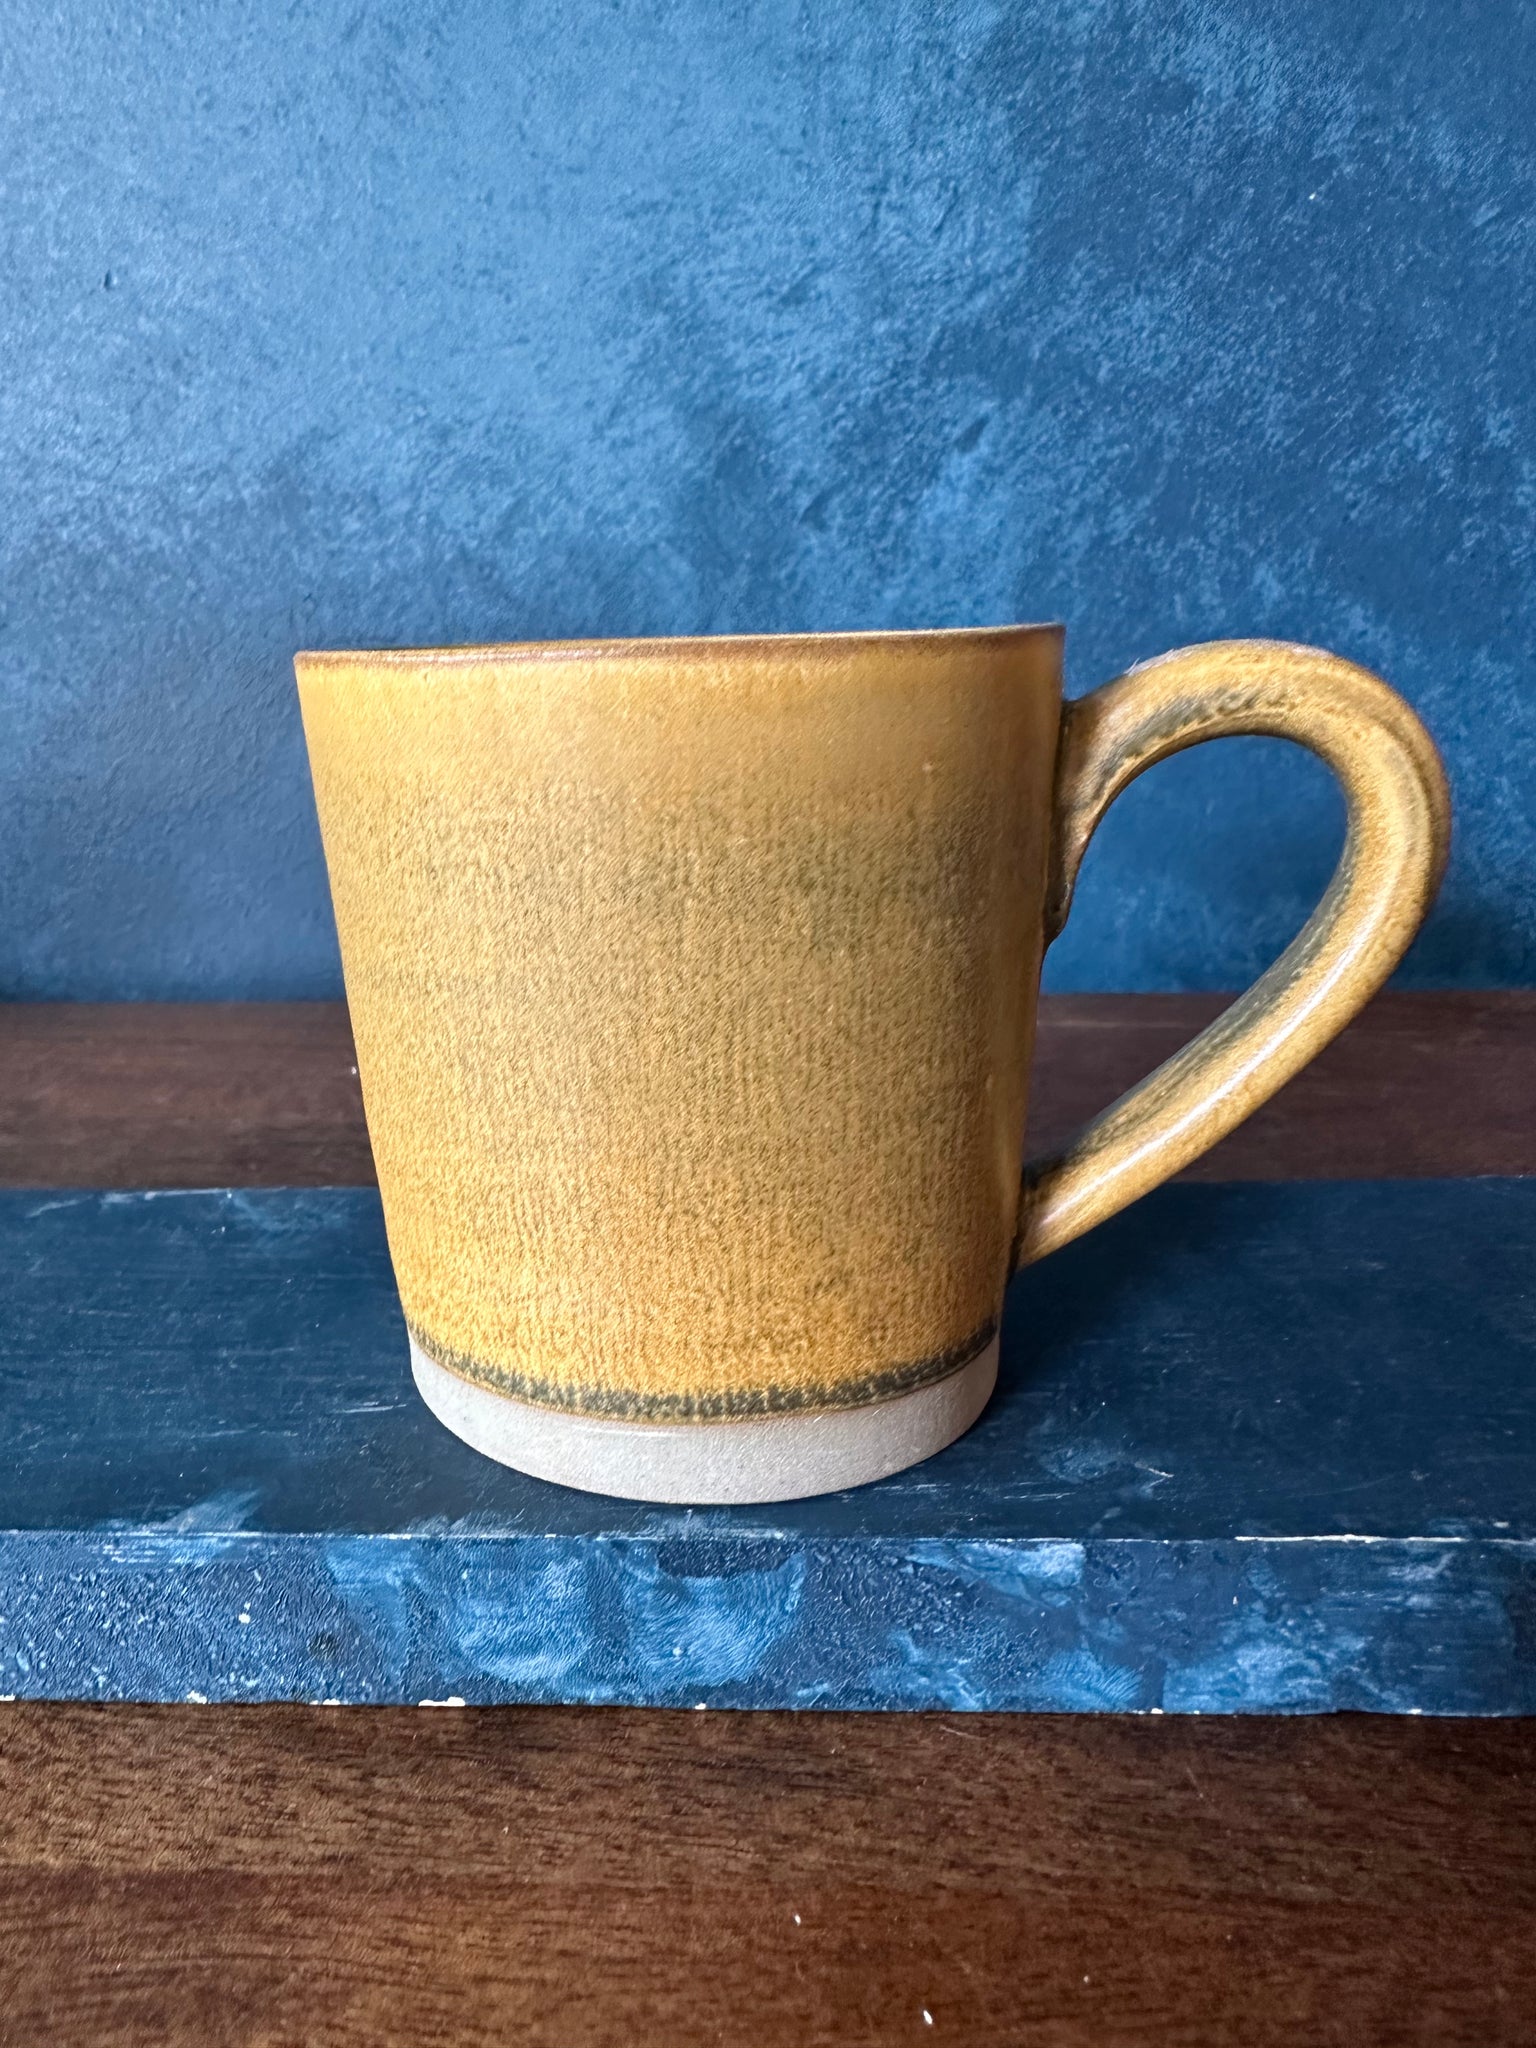 Antique Yellow Cup